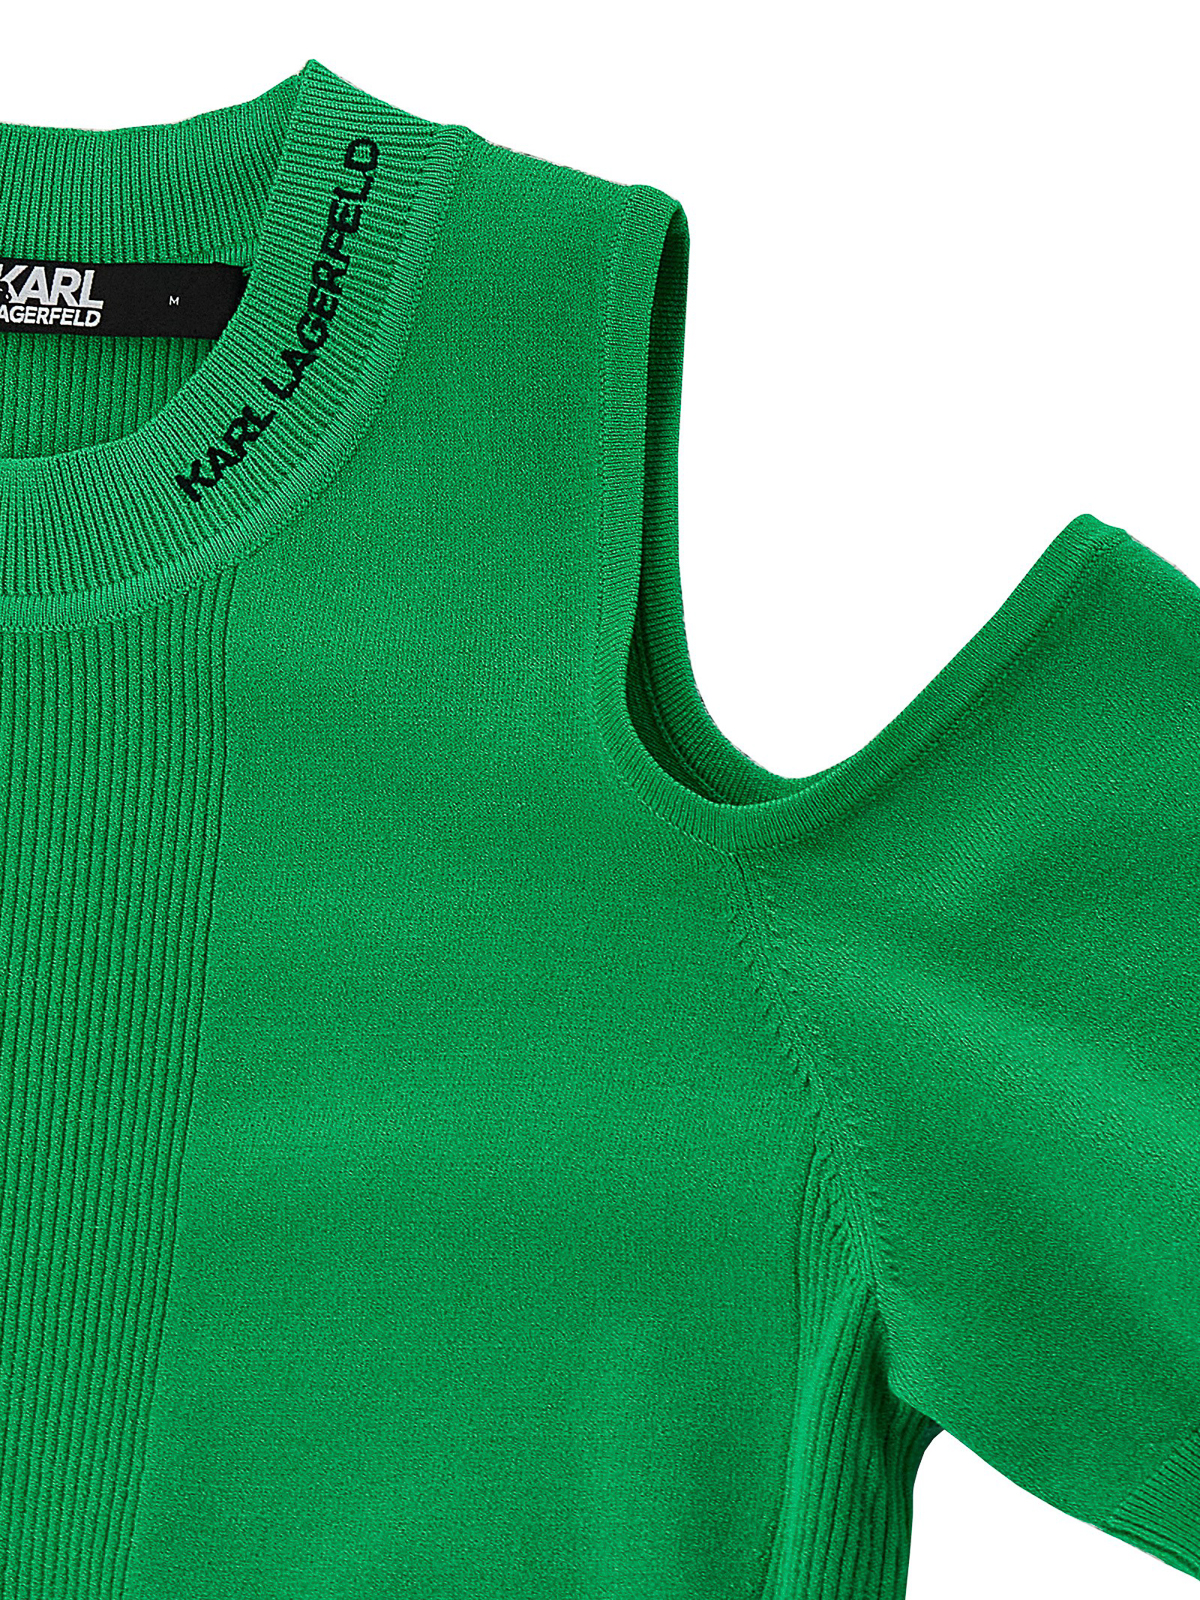 Shop Karl Lagerfeld Cut Out Top In Green